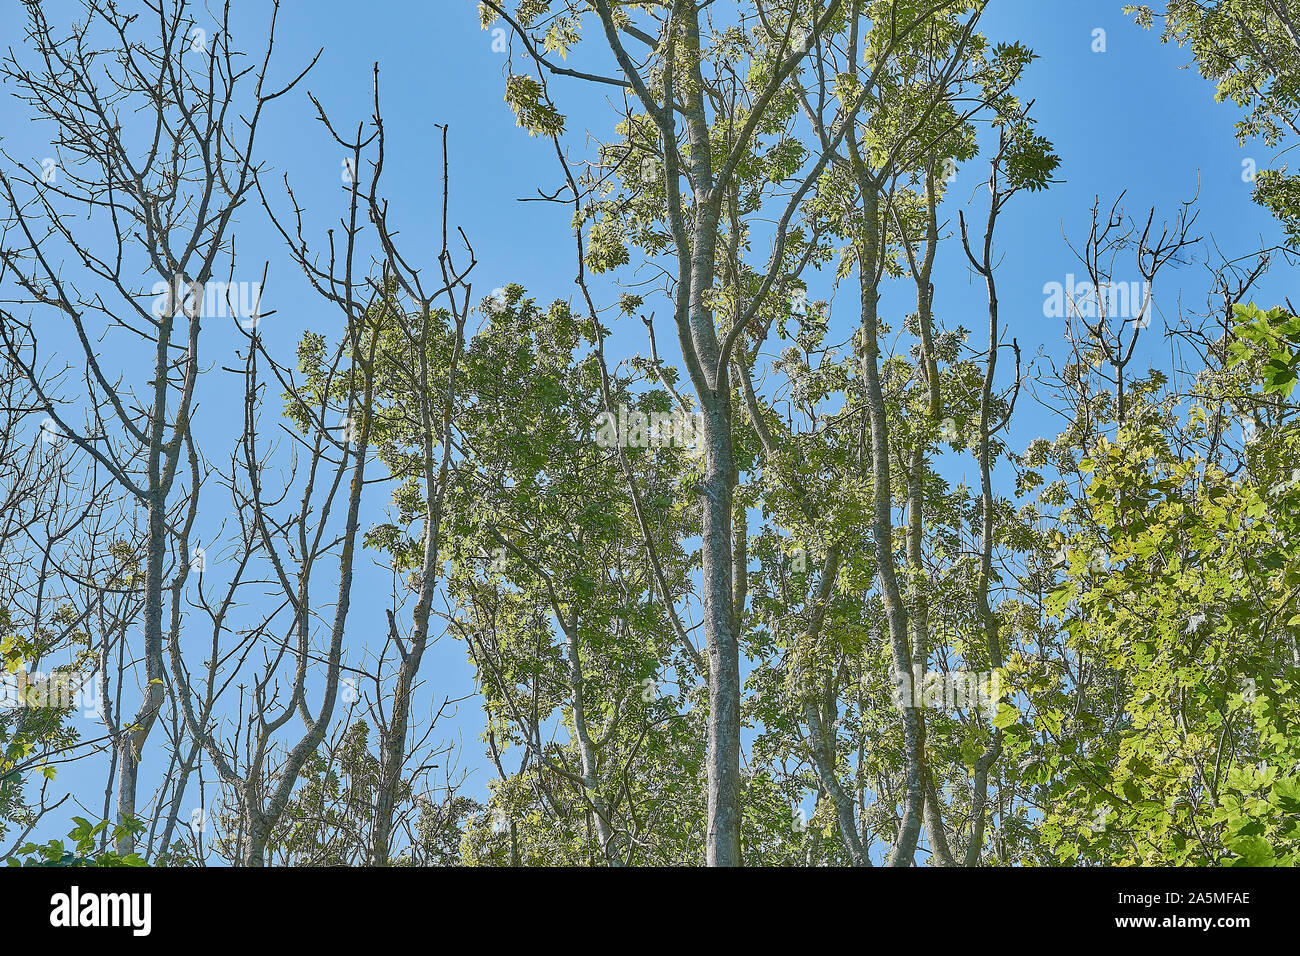 Ash trees with Ash Dieback disease on a sunny day Stock Photo